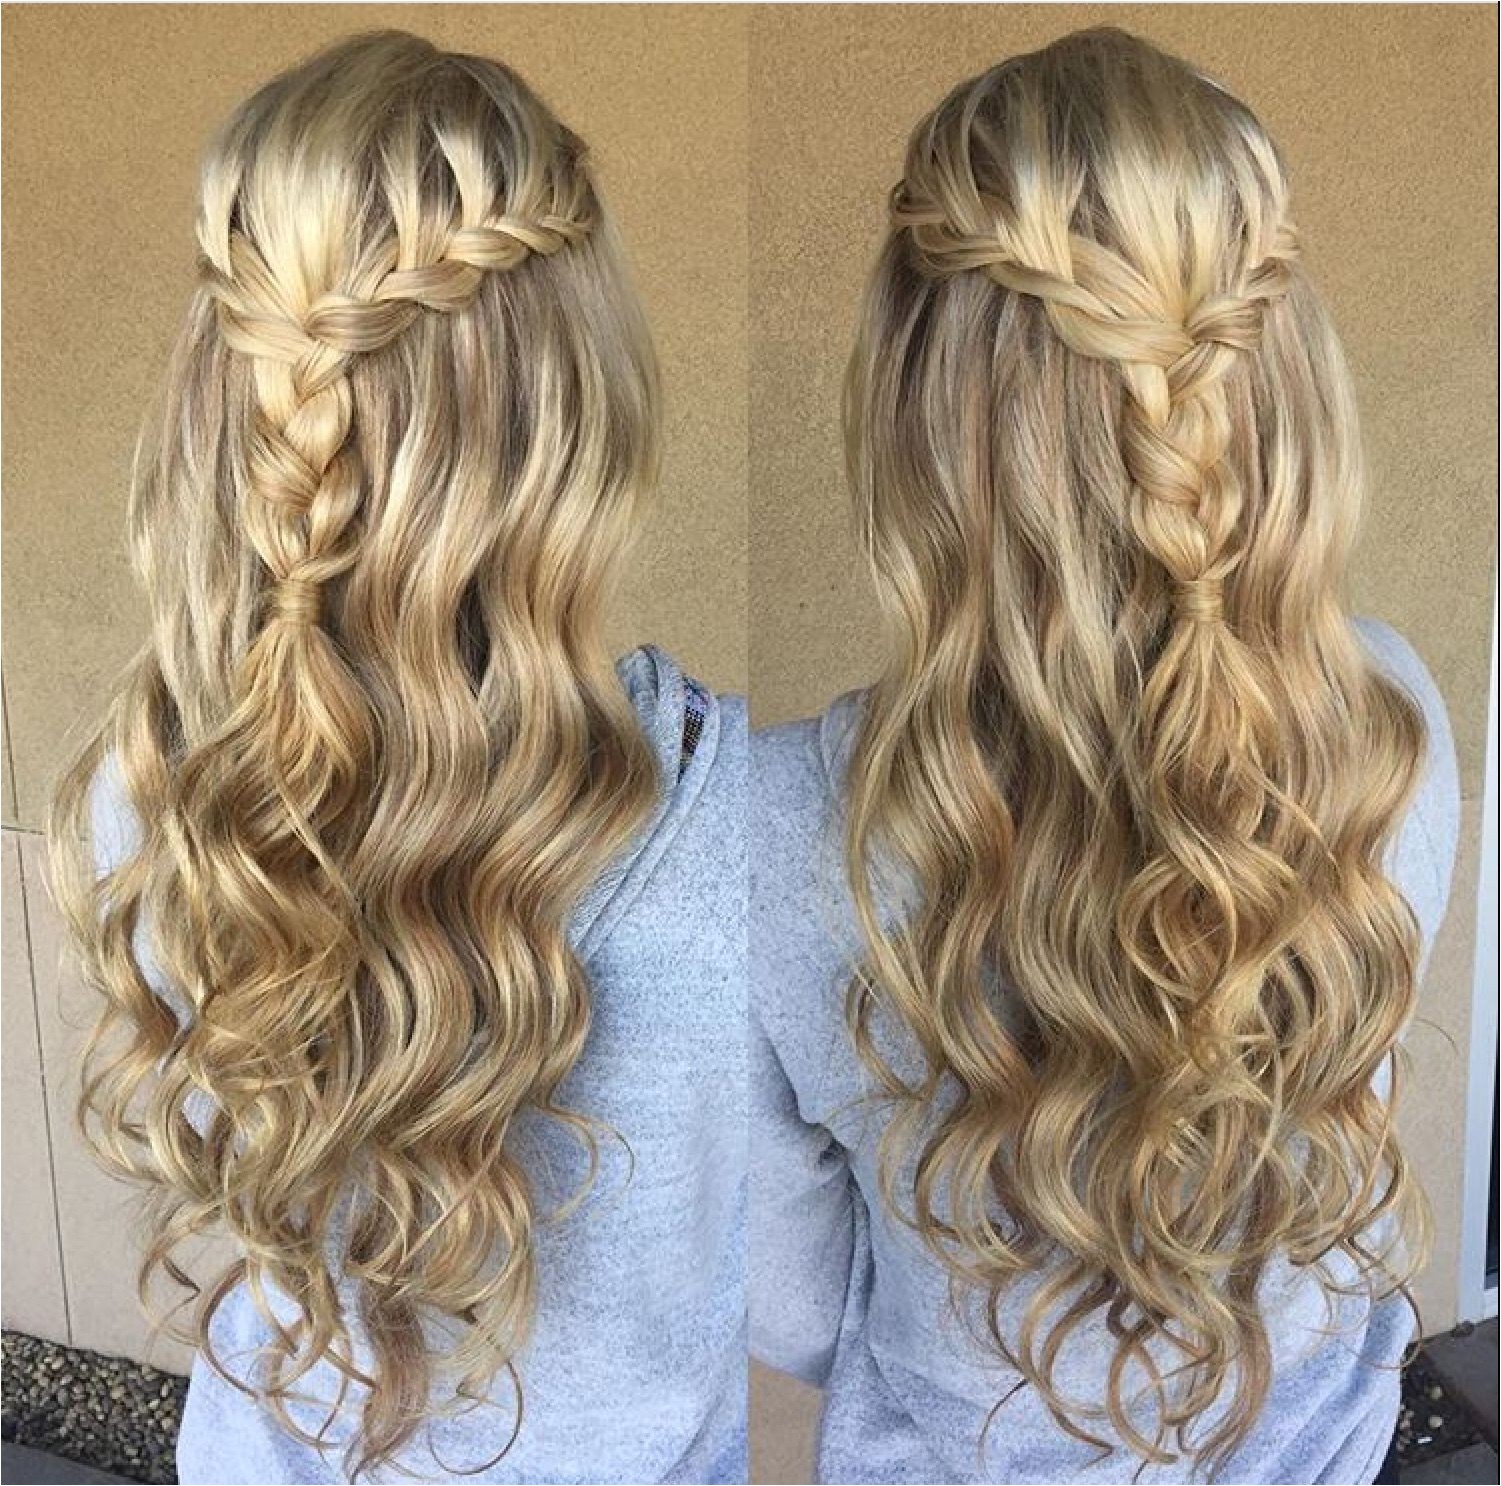 Curly Braided Hairstyles for Prom Blonde Braid Prom formal Hairstyle Half Up Long Hair Wedding Updo